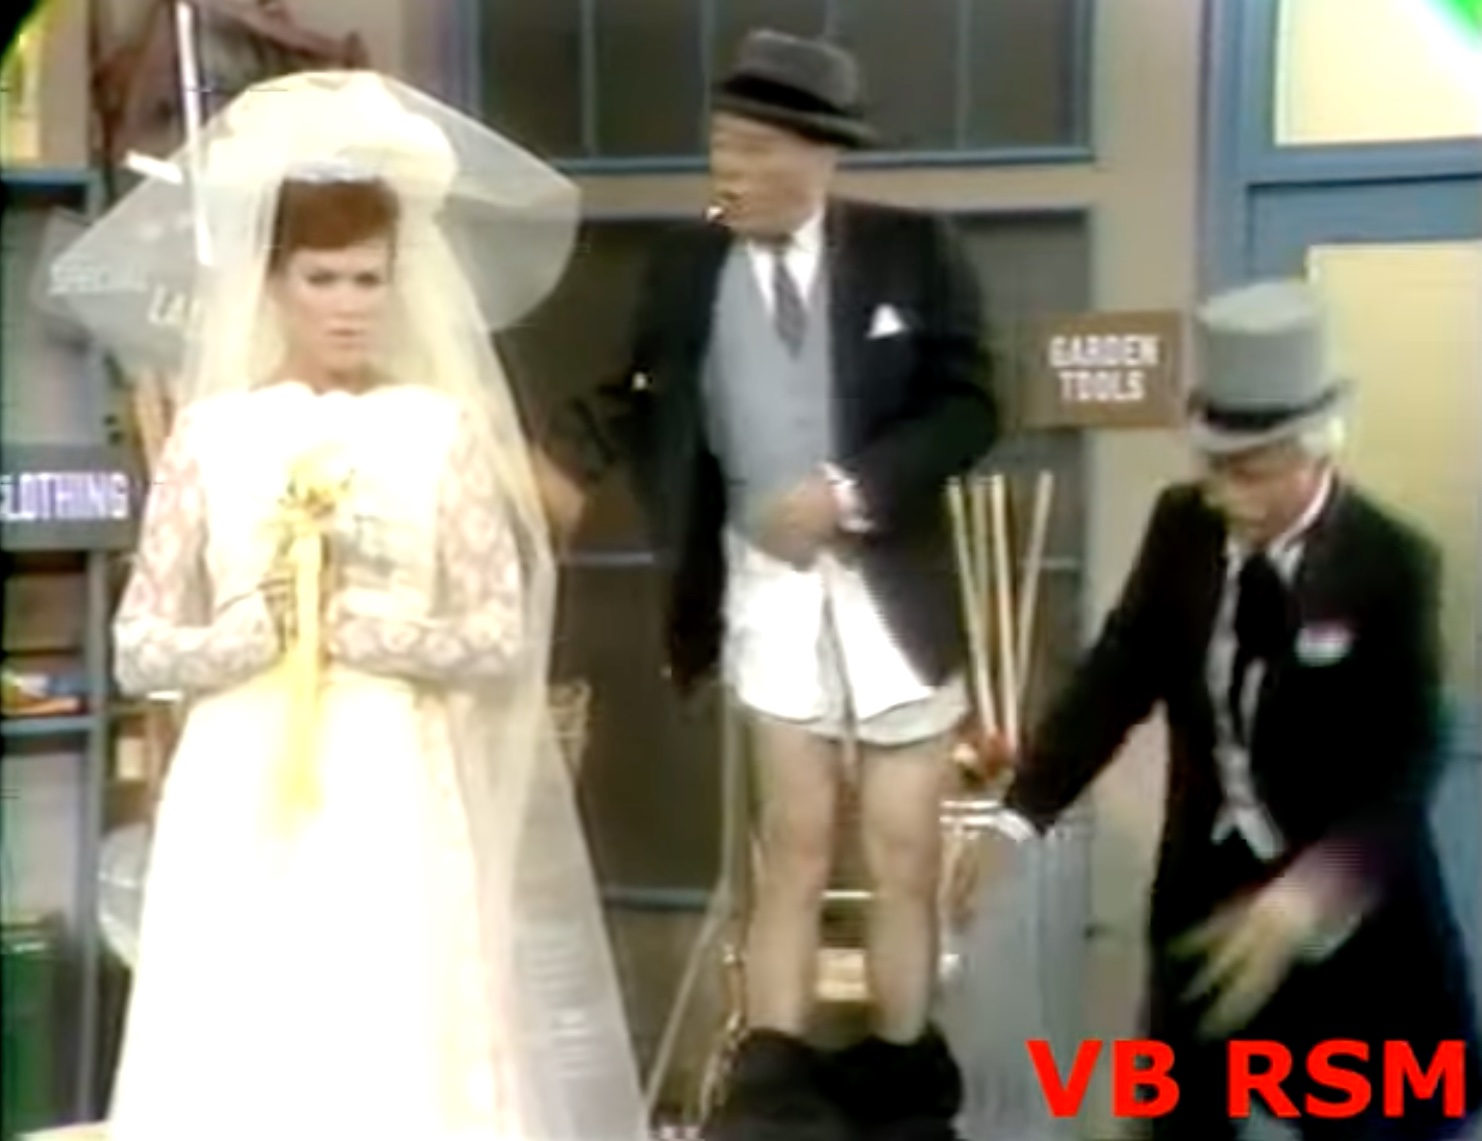 Tall bride (Jan Davis), George Gobel, and San Fernando Red in the wedding ceremony -- what could go wrong?